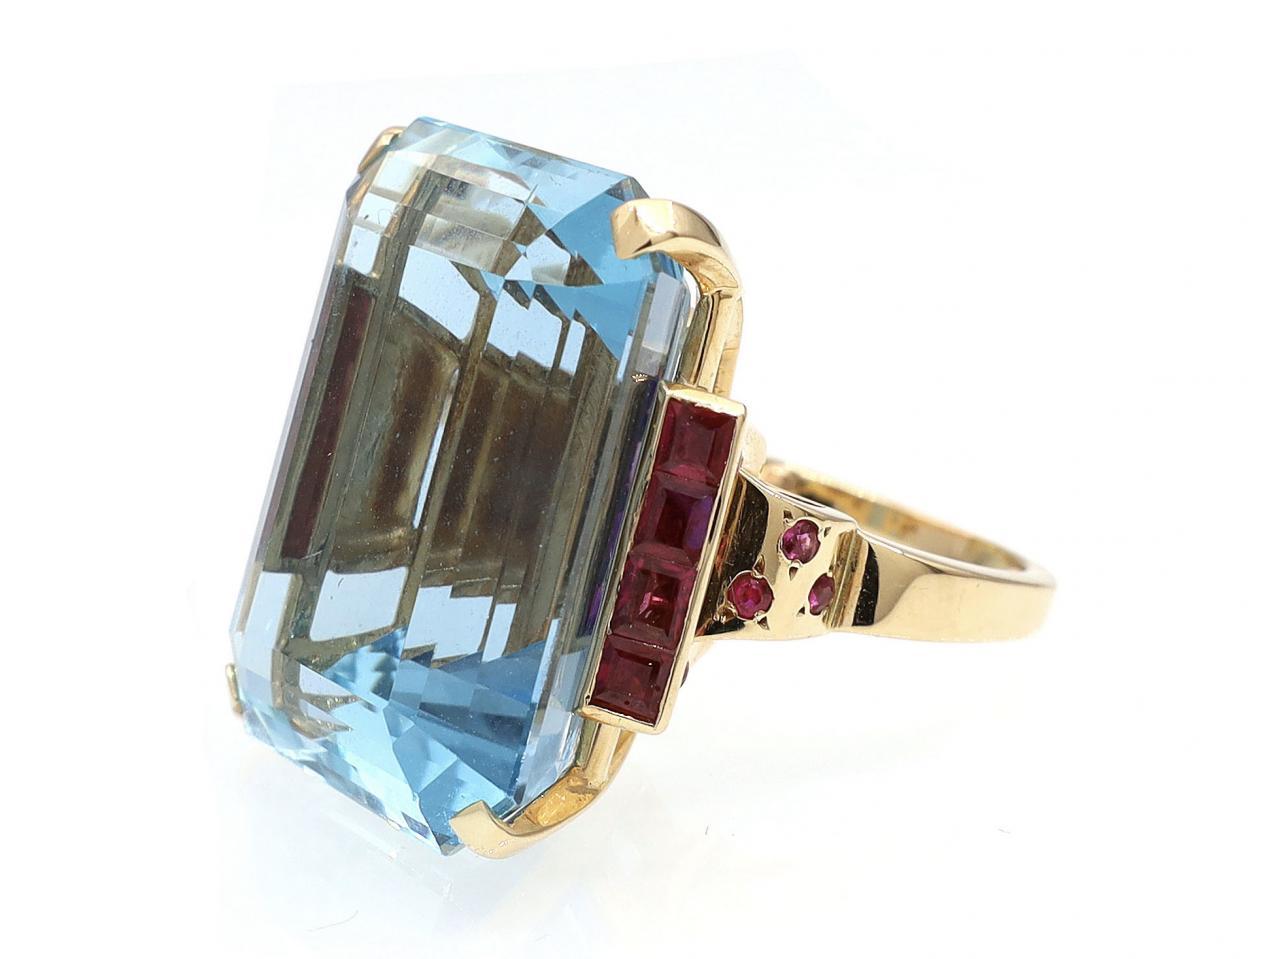 1940s Santa Maria 36.86ct aquamarine and Burmese ruby cocktail ring in 18kt yellow gold. Centred with a 36.86ct octagonal step cut Santa Maria aquamarine in a four claw setting, flanked to either side with square step cut Burmese rubies in channel